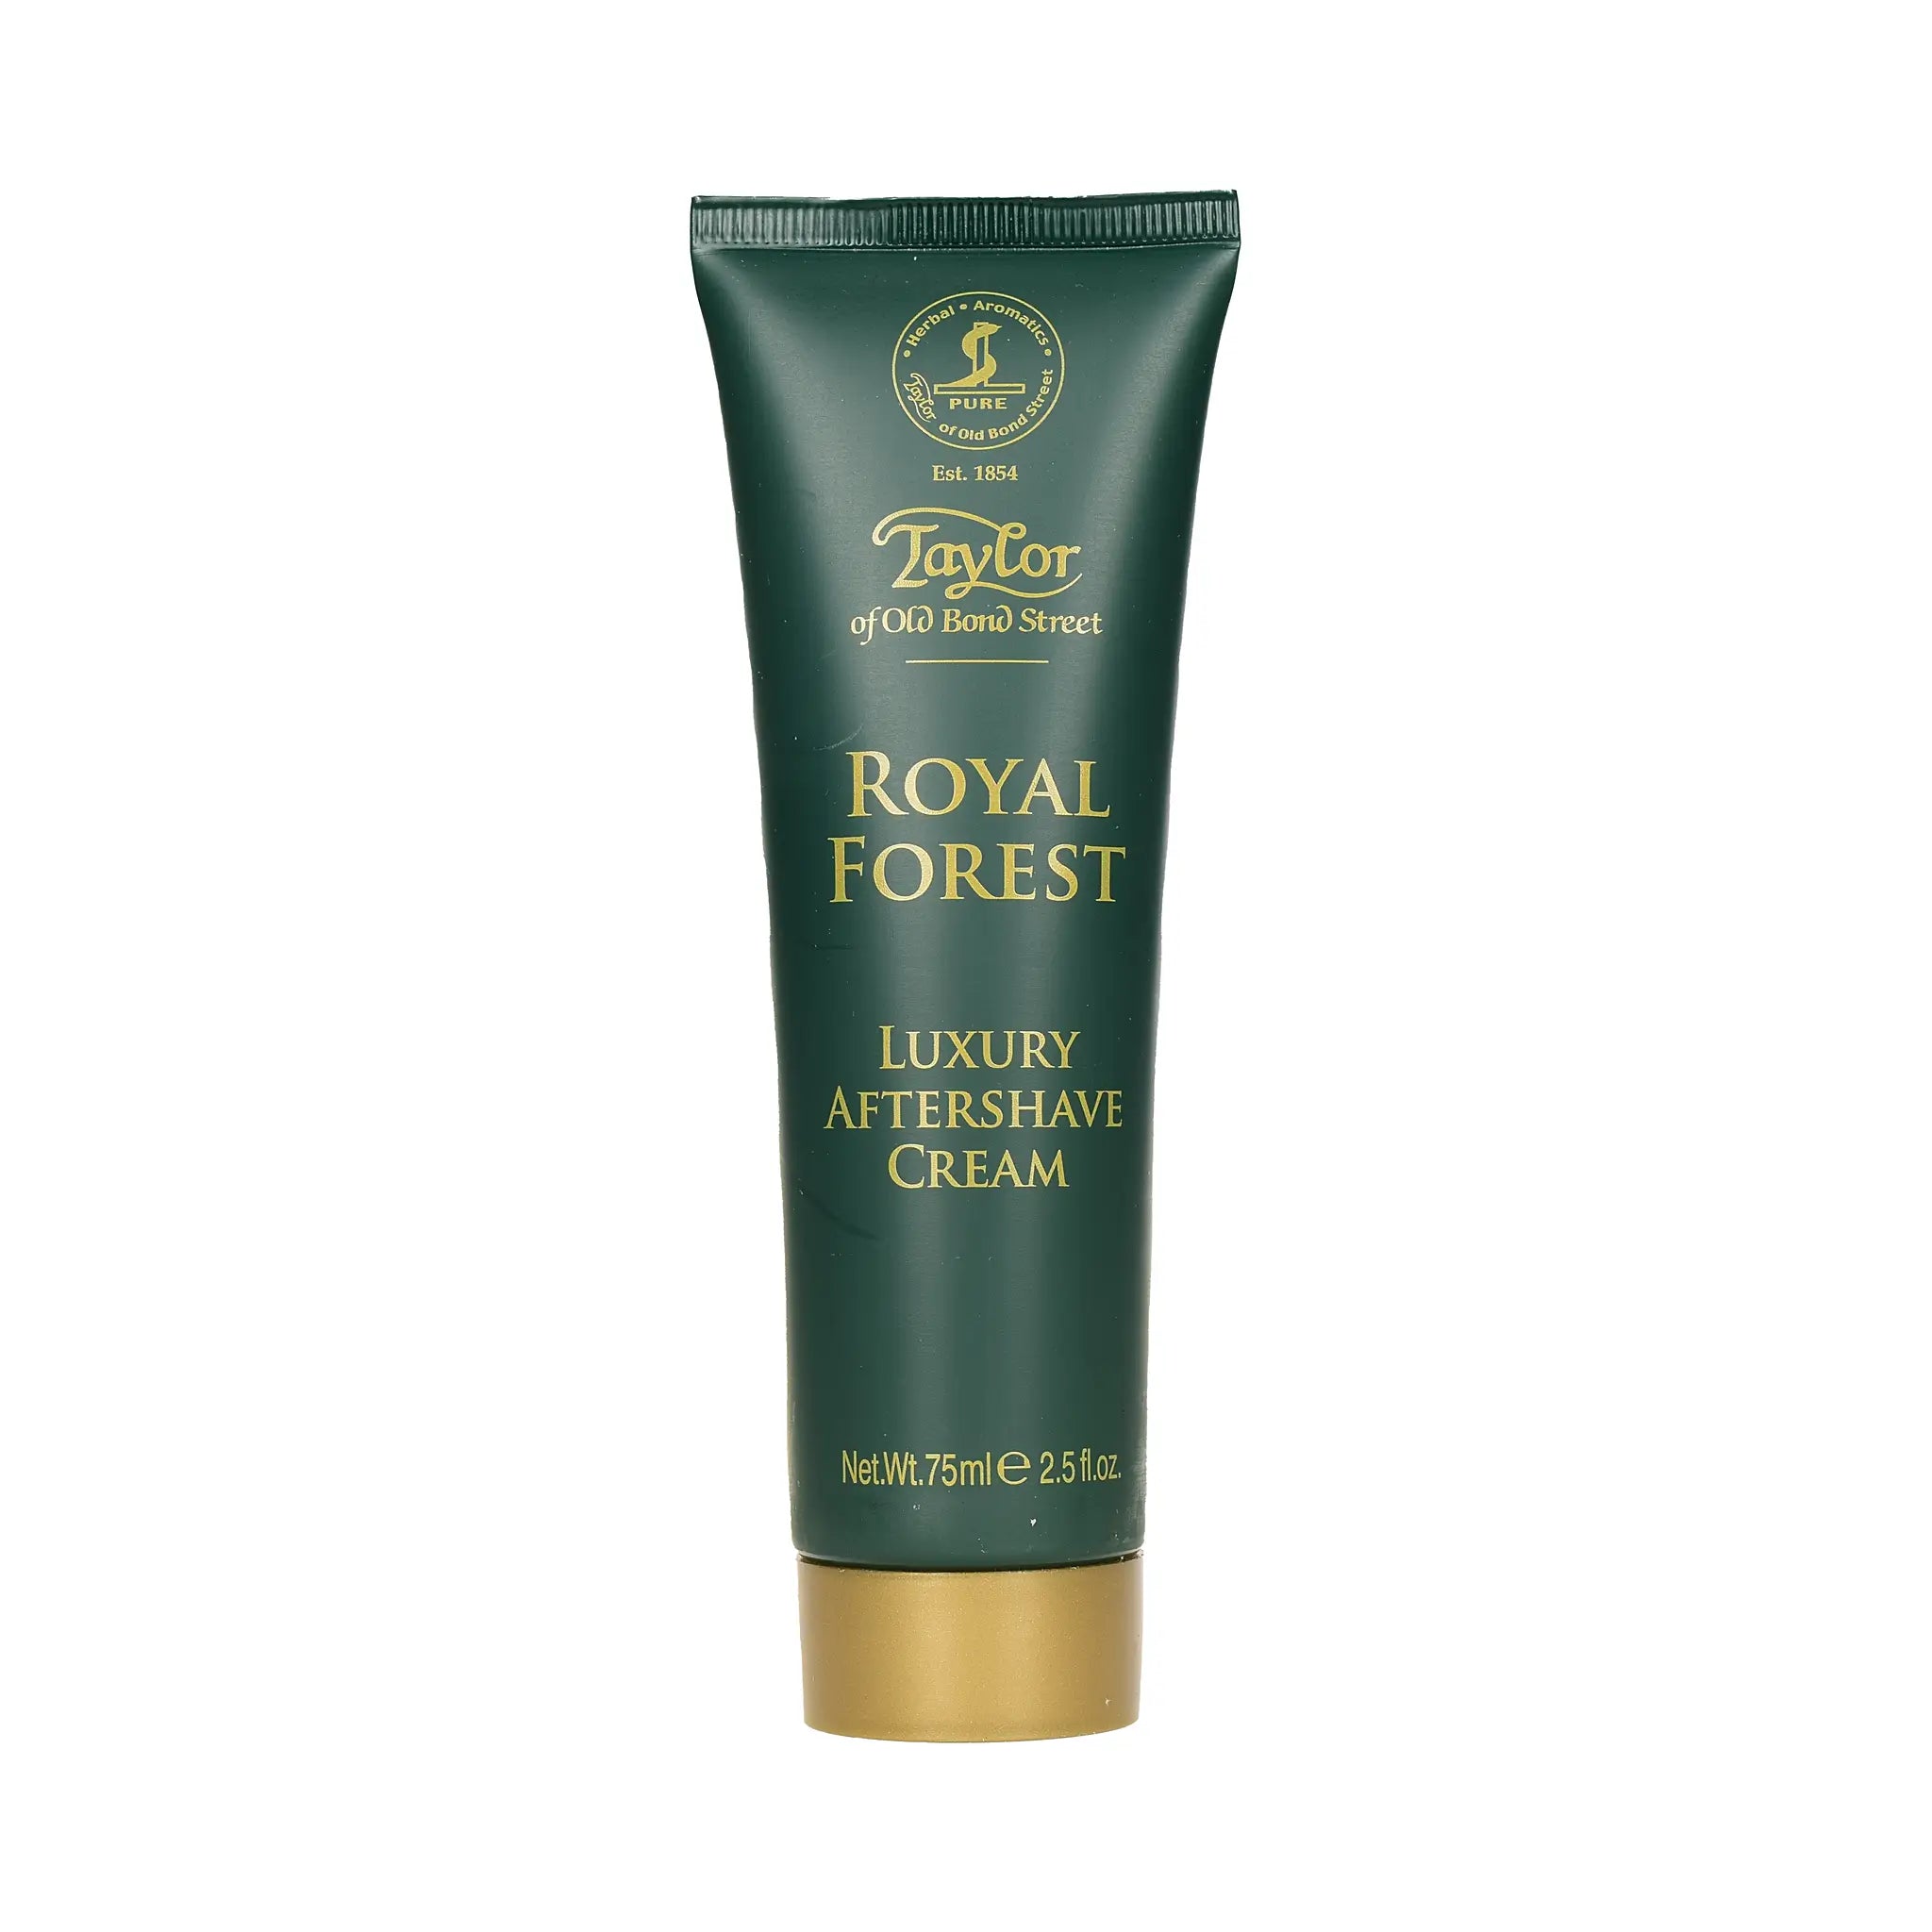 STREET OF OLD Aftershave ml Forest Royal Cream, 75 Tonsus – TAYLOR BOND